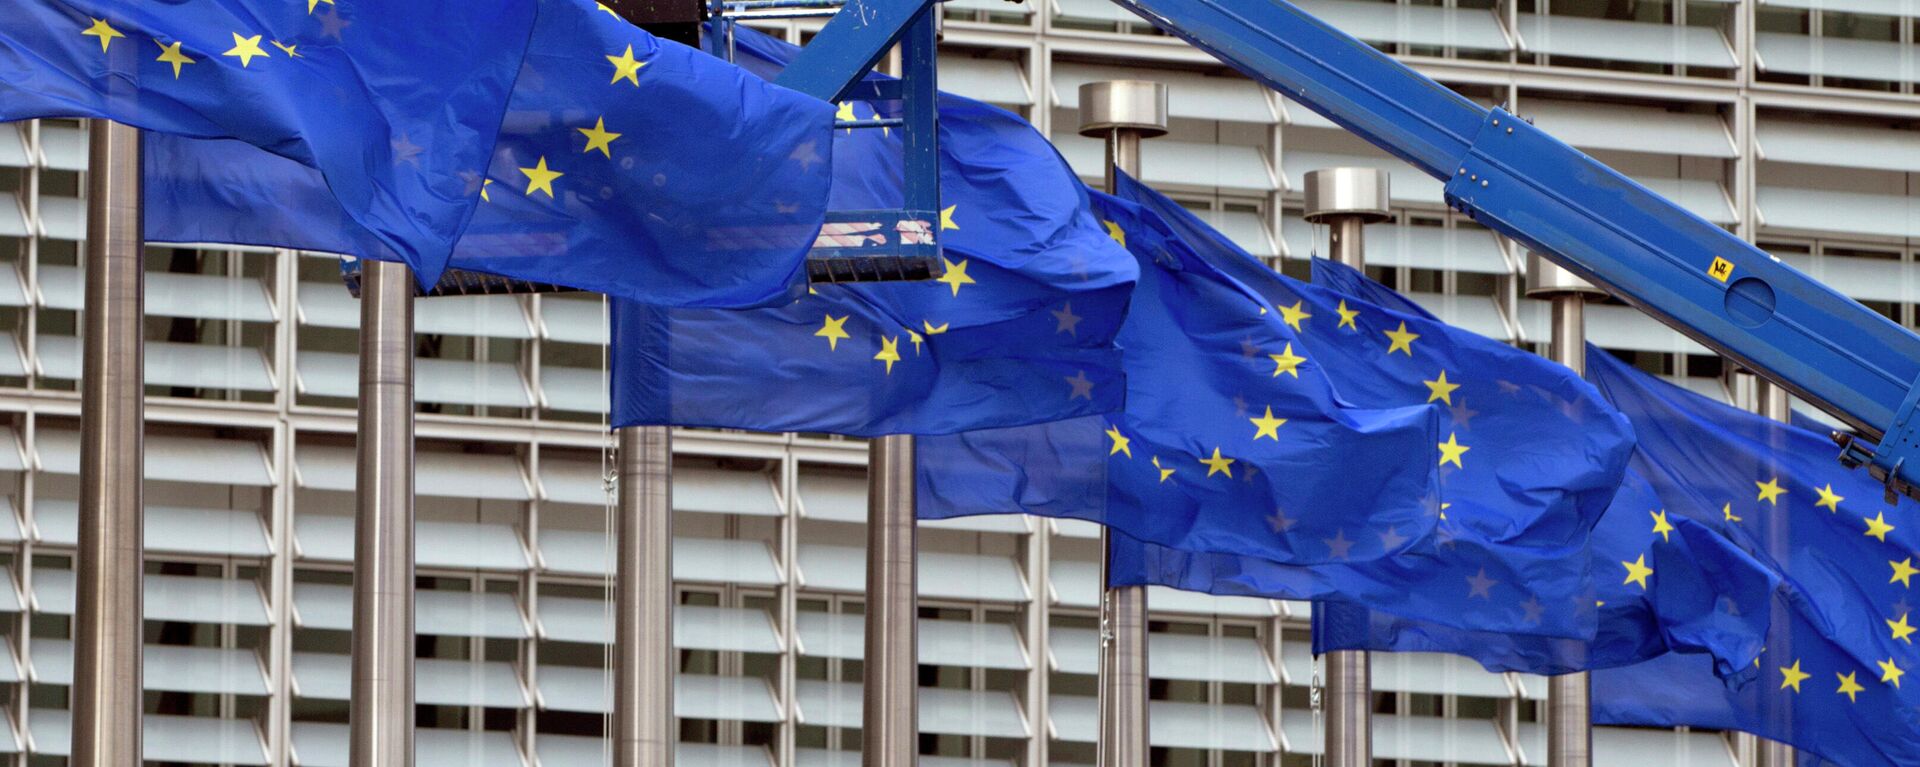 In this June 23, 2016 file photo, a worker on a lift adjusts the EU flags in front of EU headquarters in Brussels. - Sputnik International, 1920, 02.06.2022